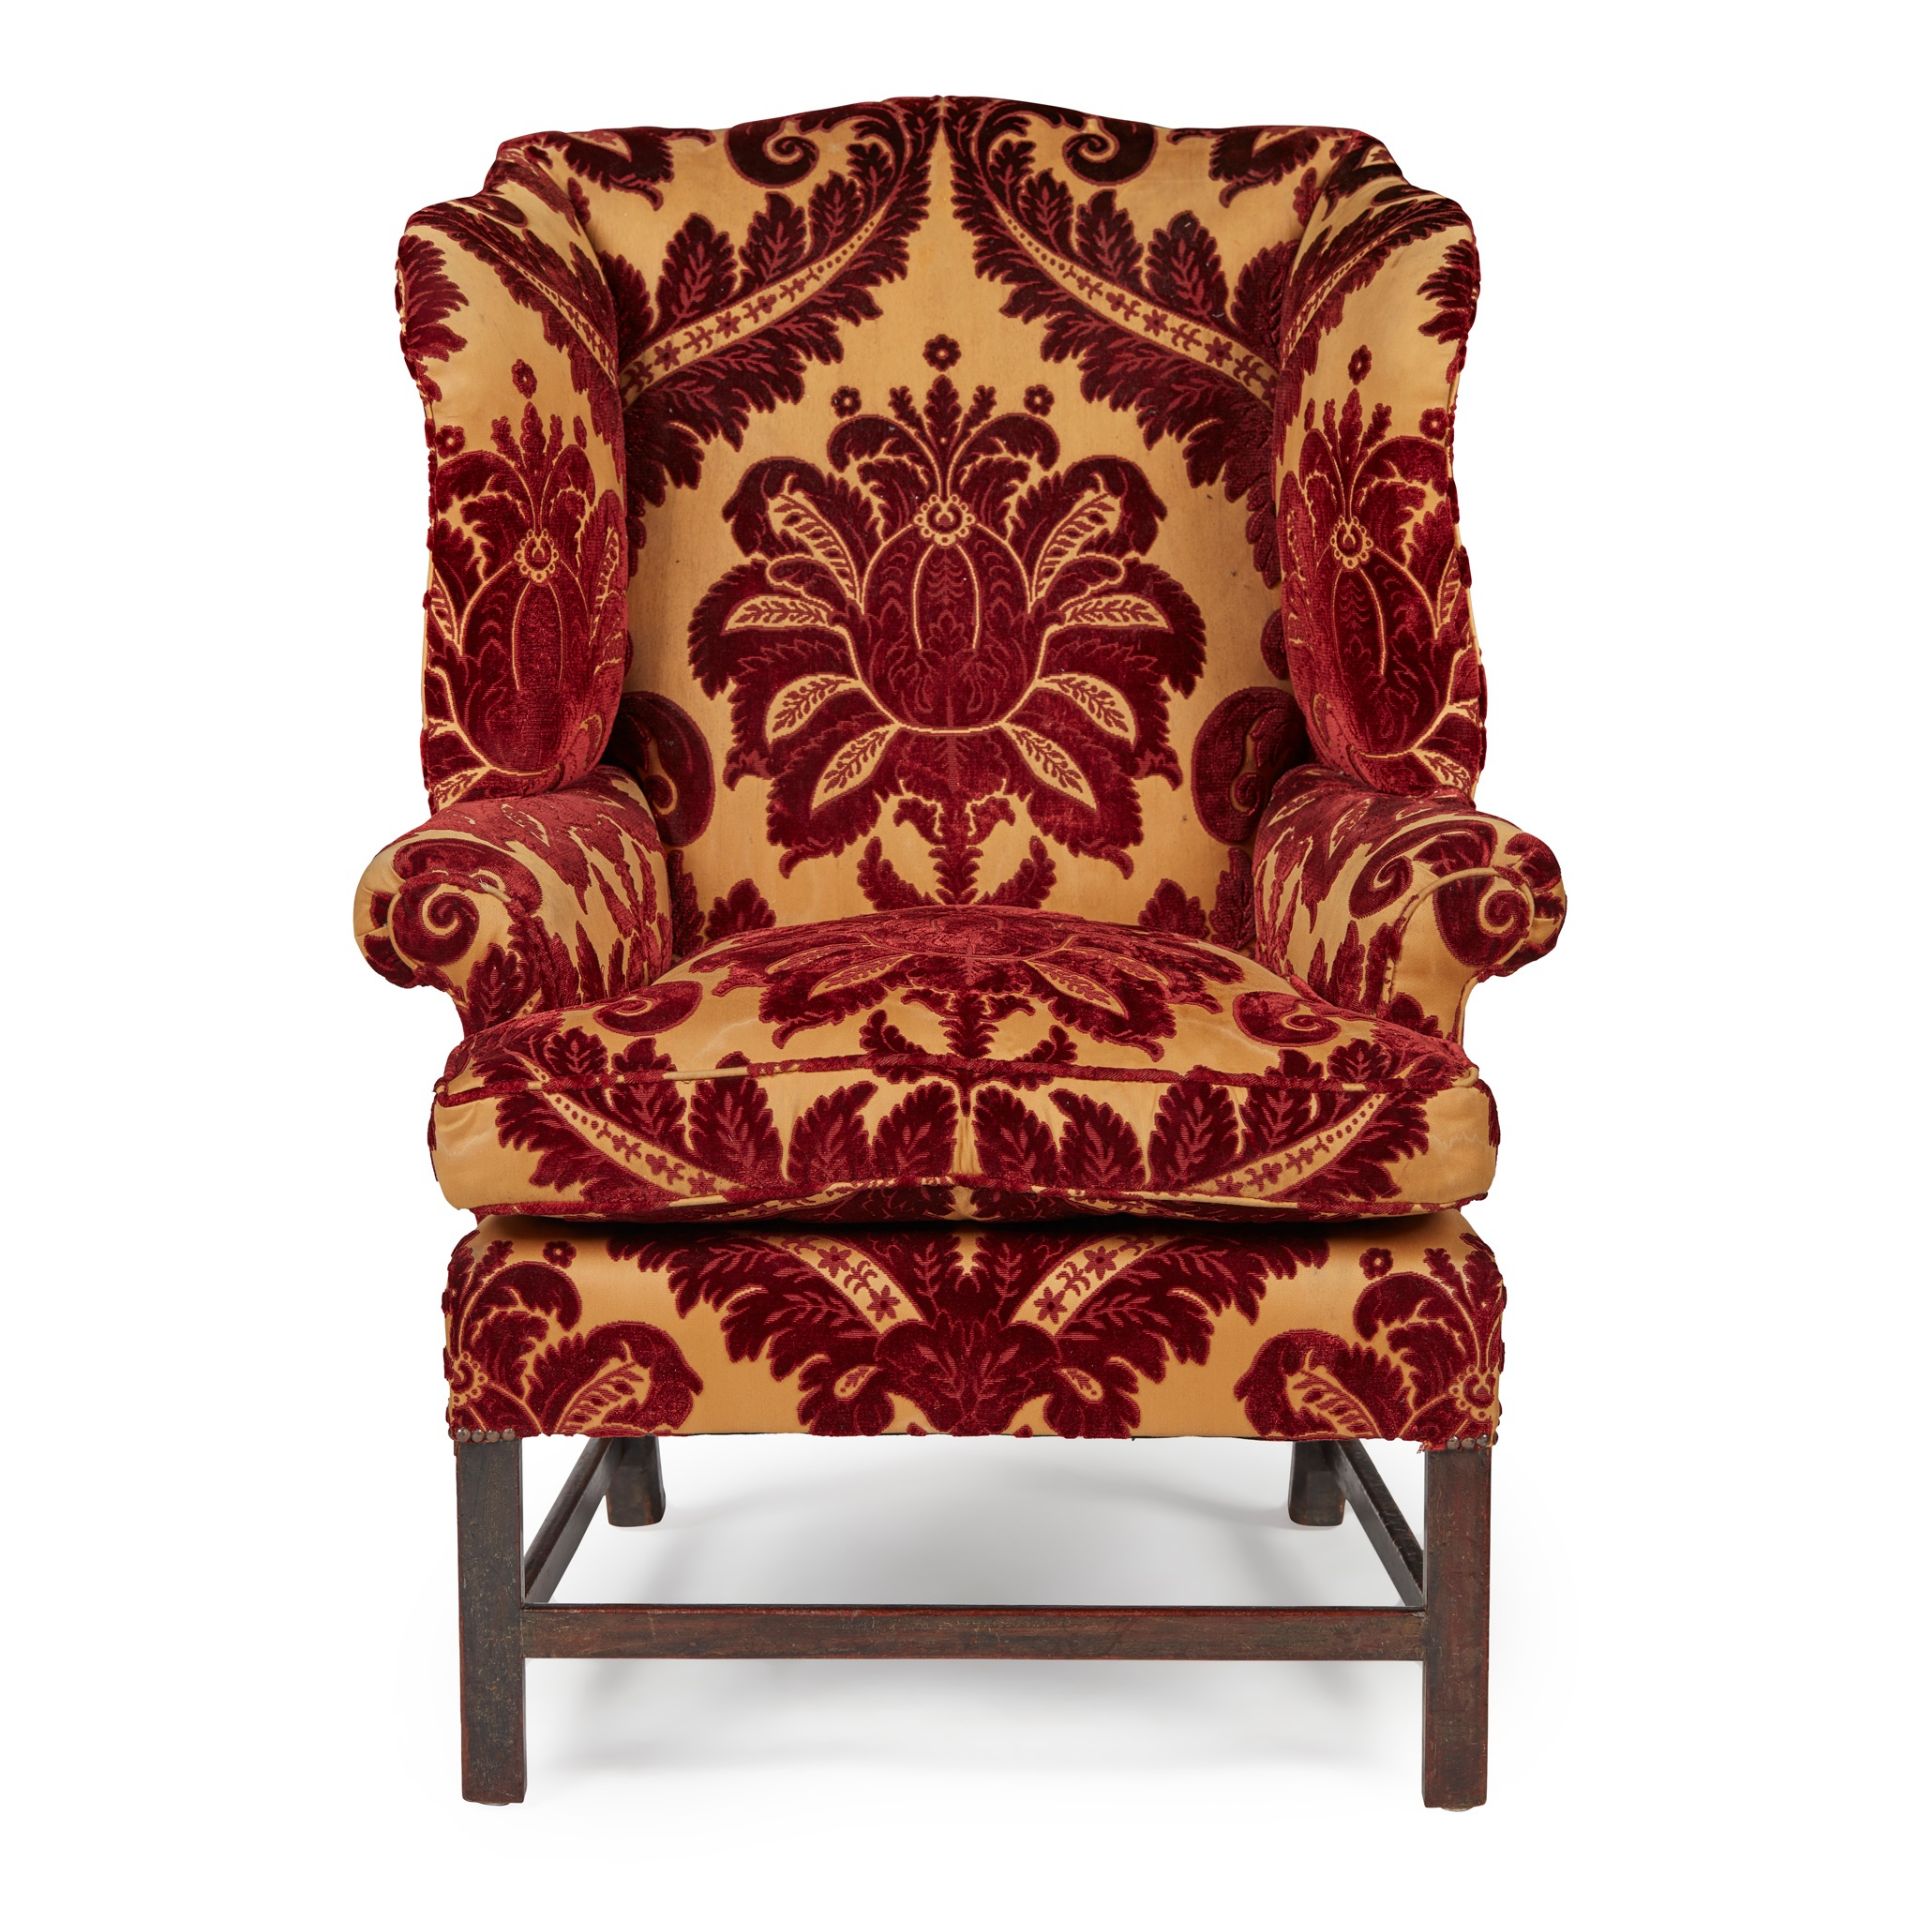 GEORGE III MAHOGANY WING ARMCHAIR LATE 18TH CENTURY - Image 2 of 2